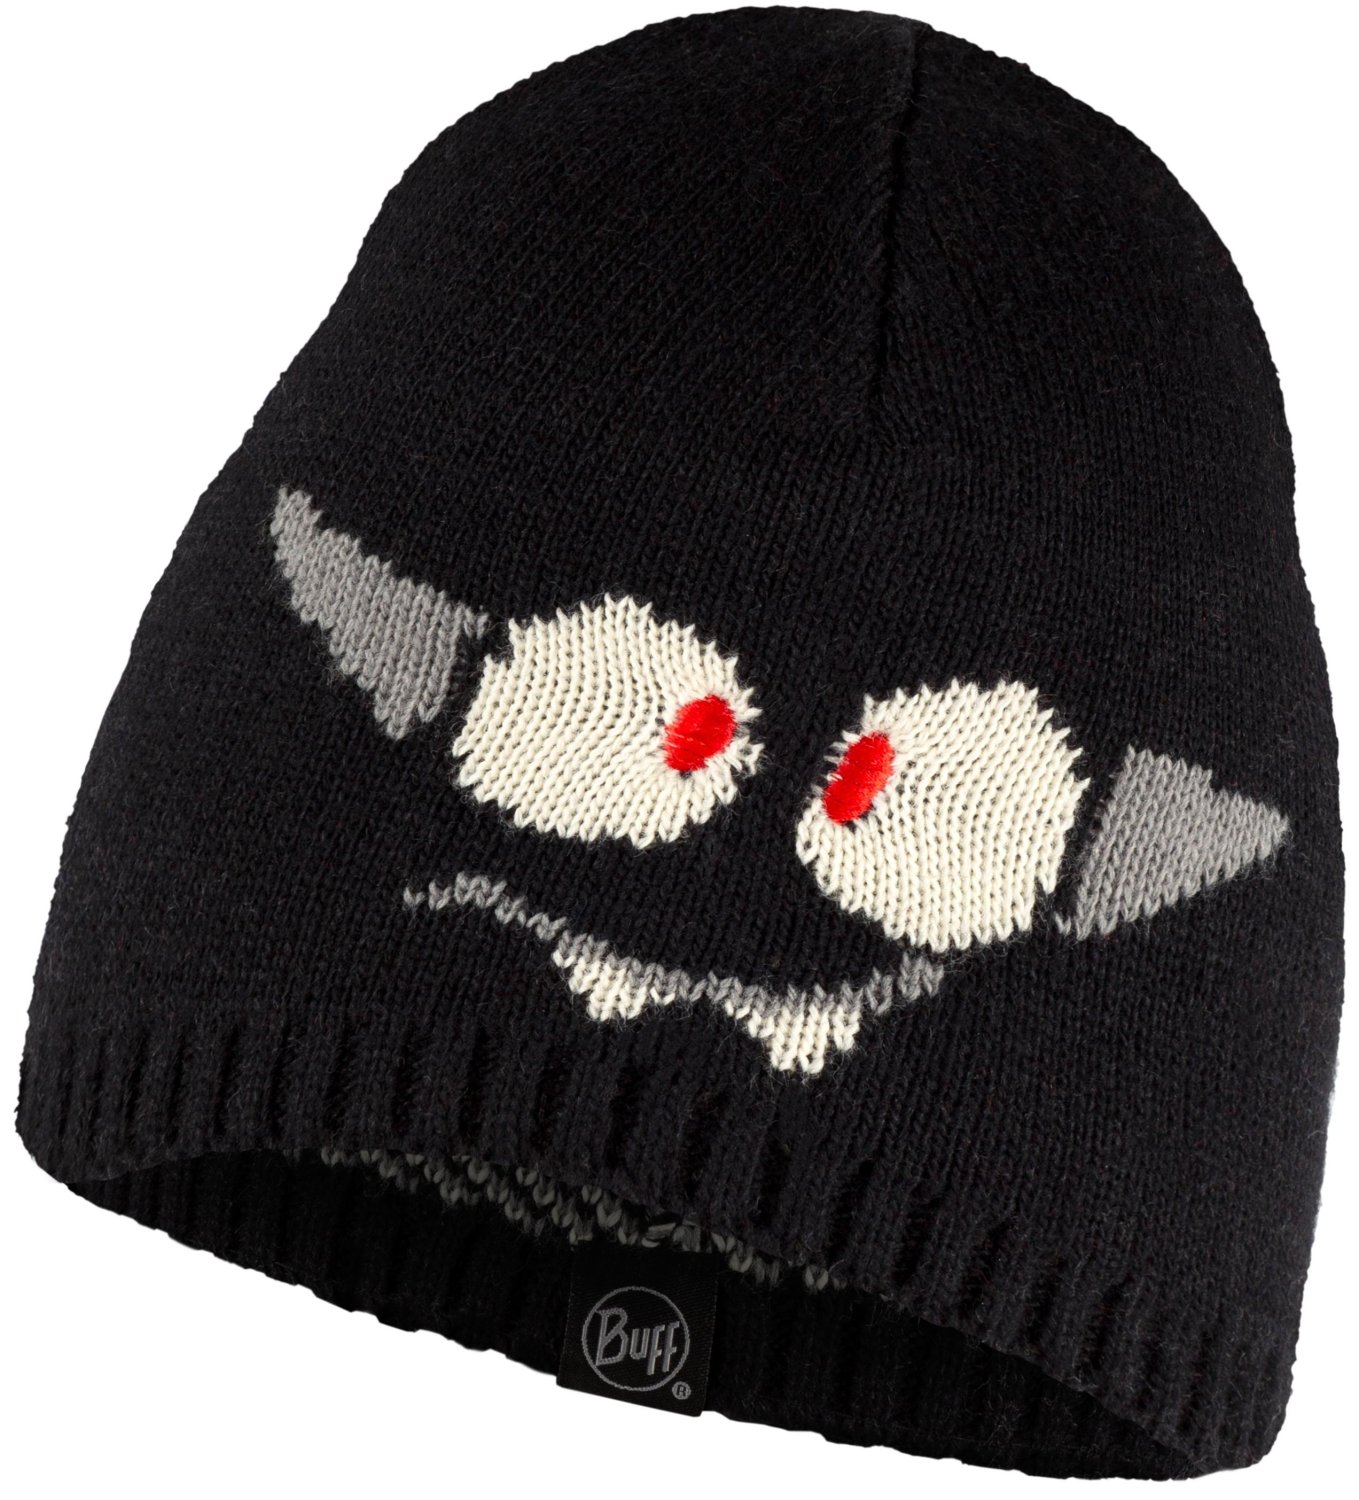 Шапка Buff Knitted Hat Bonky Baffy Black US:one size, 129626.999.10.00